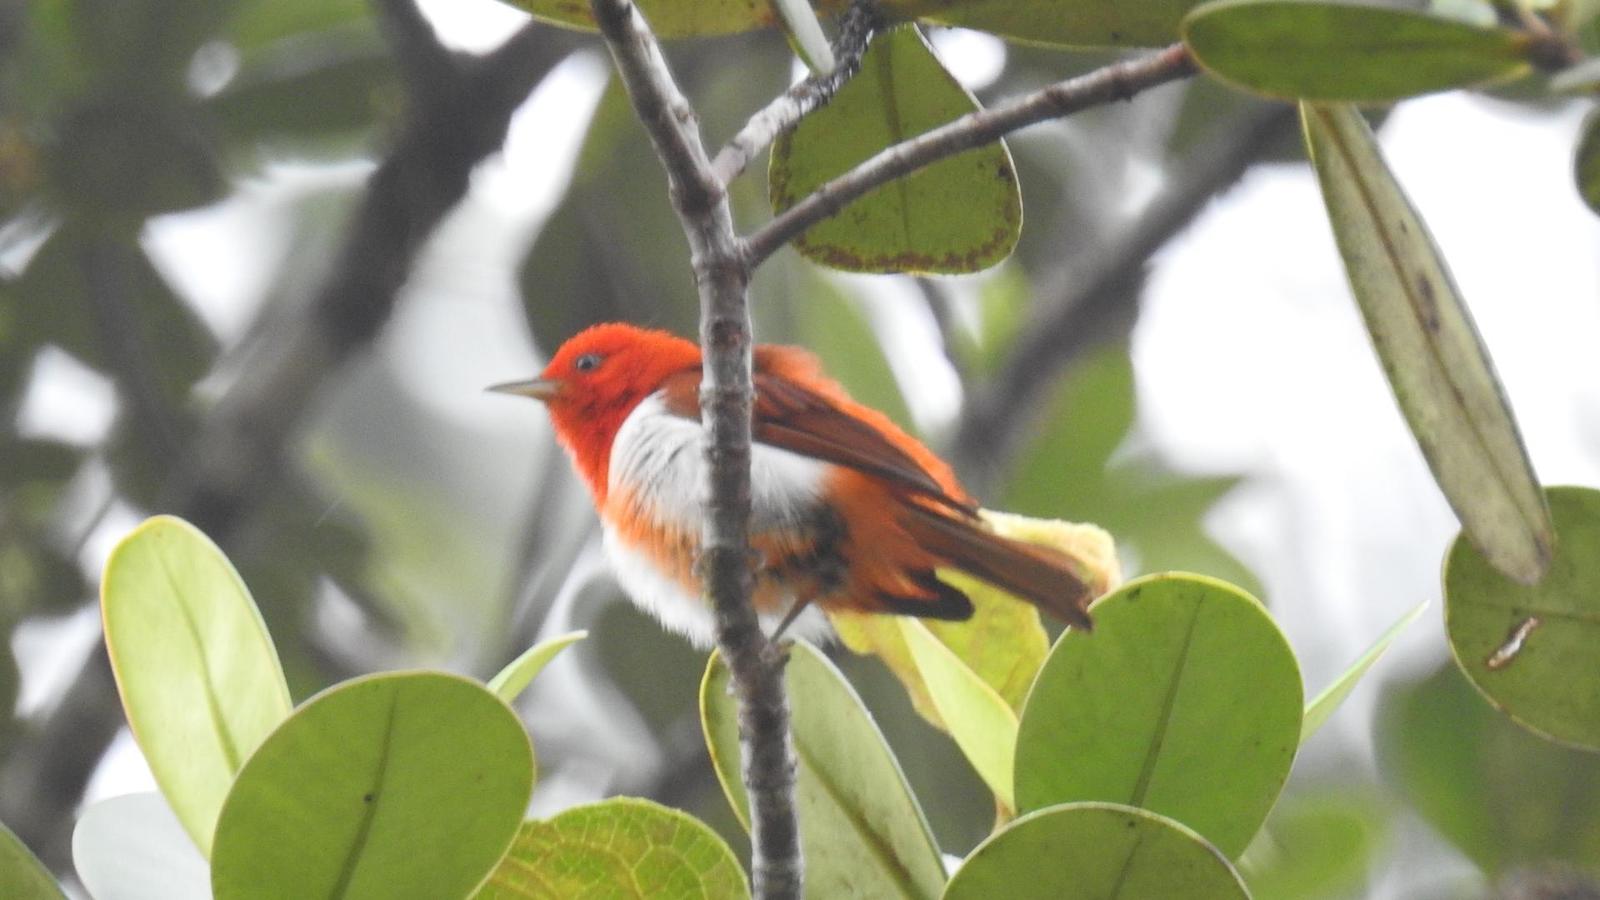 Scarlet-and-white Tanager Photo by Julio Delgado